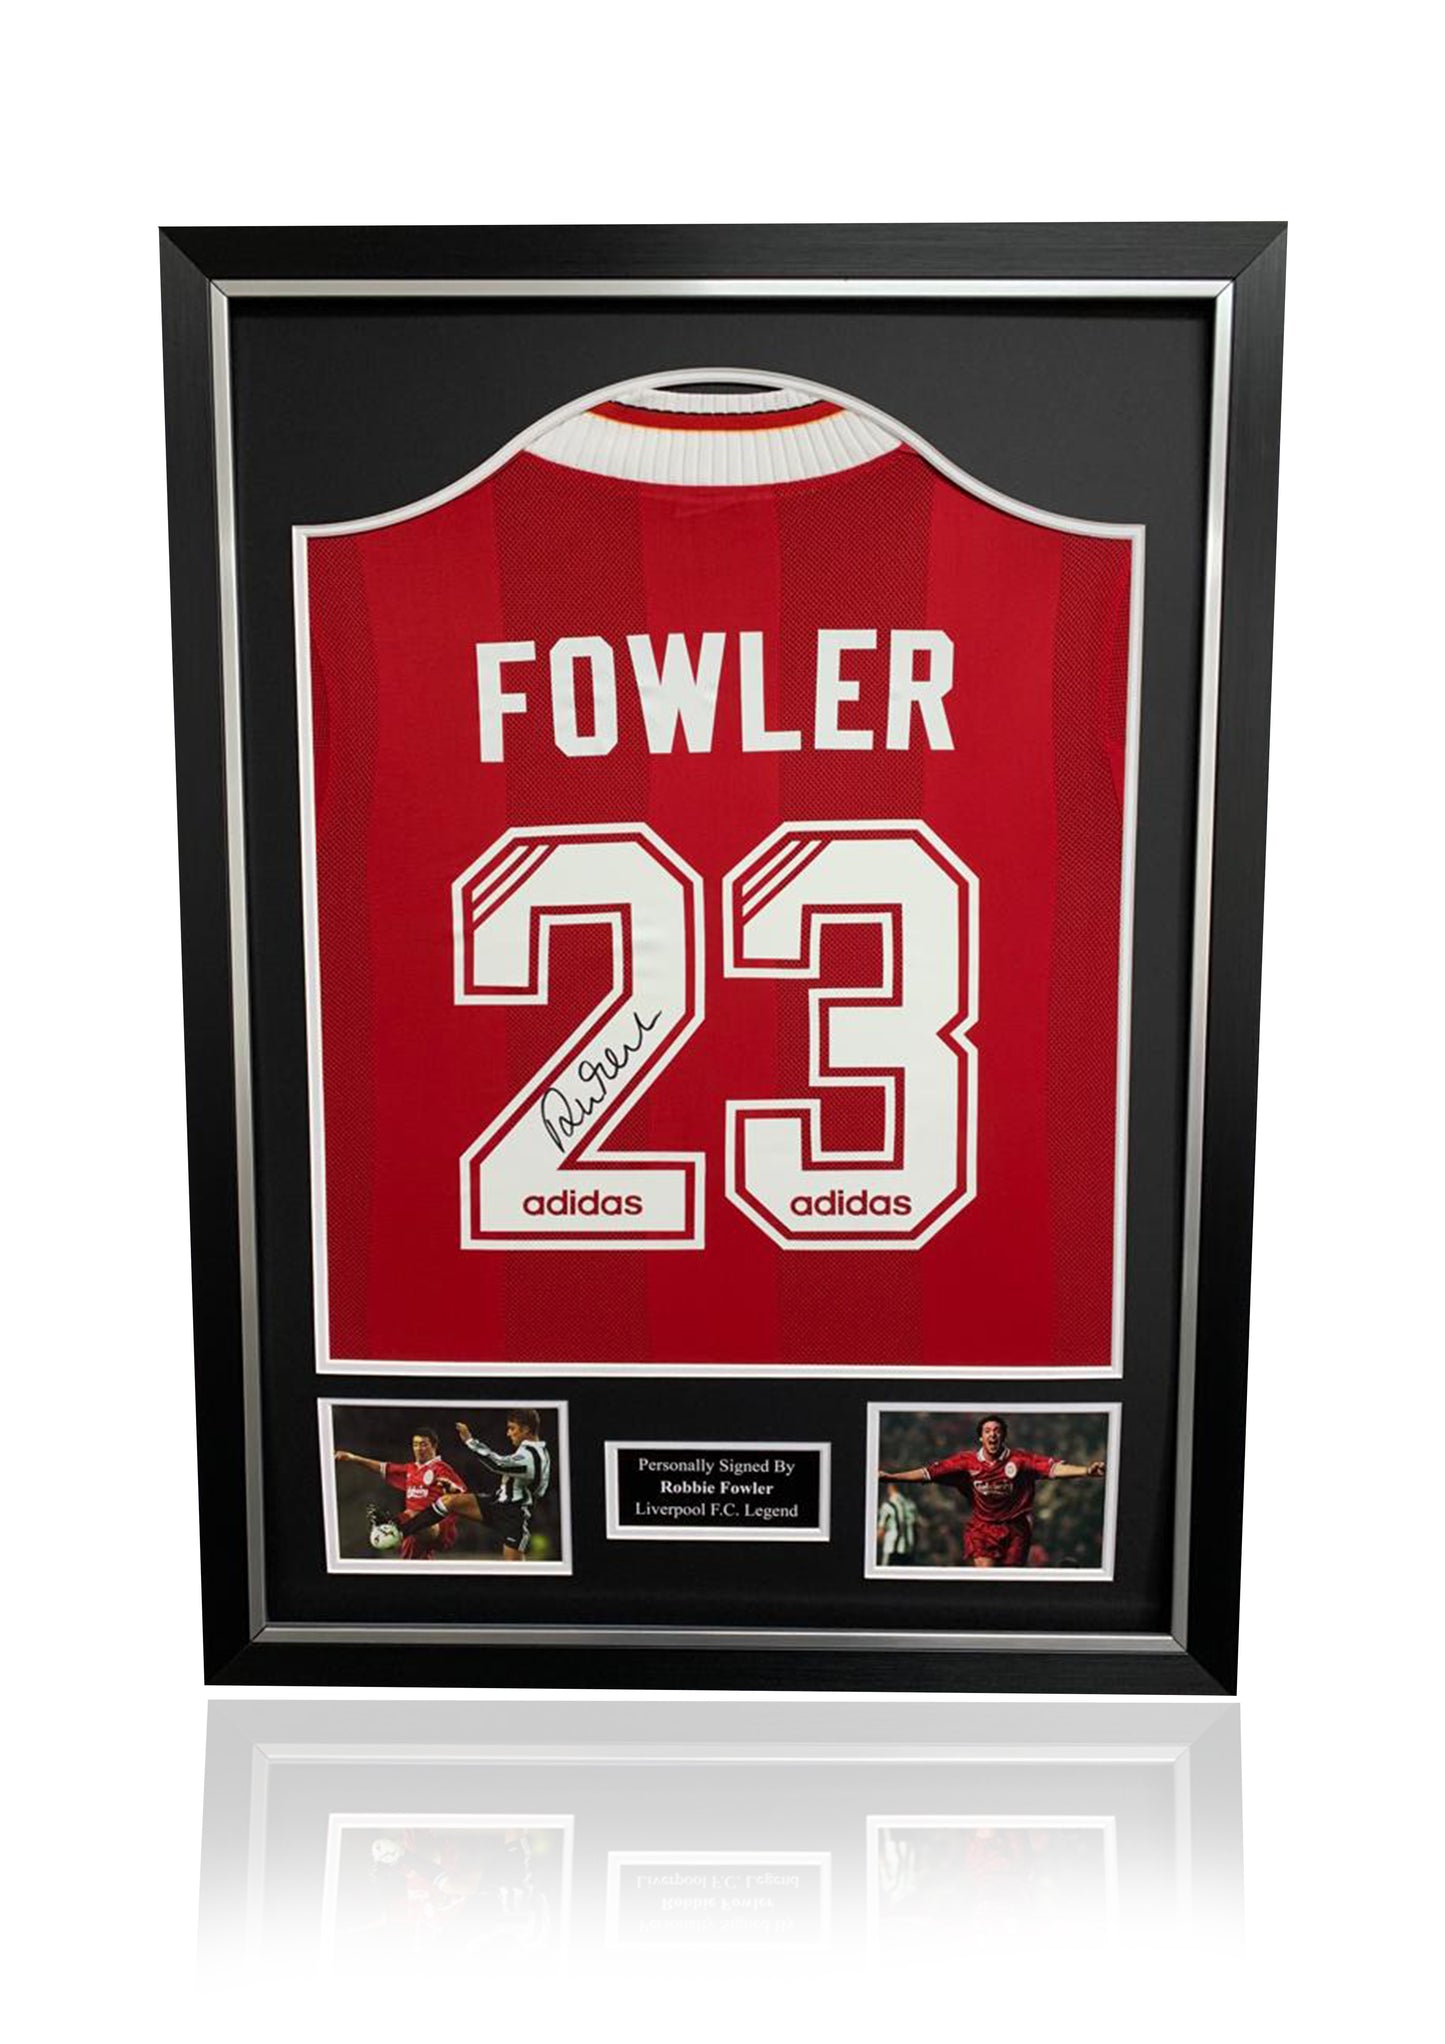 Robbie Fowler 23 signed framed Liverpool FC shirt